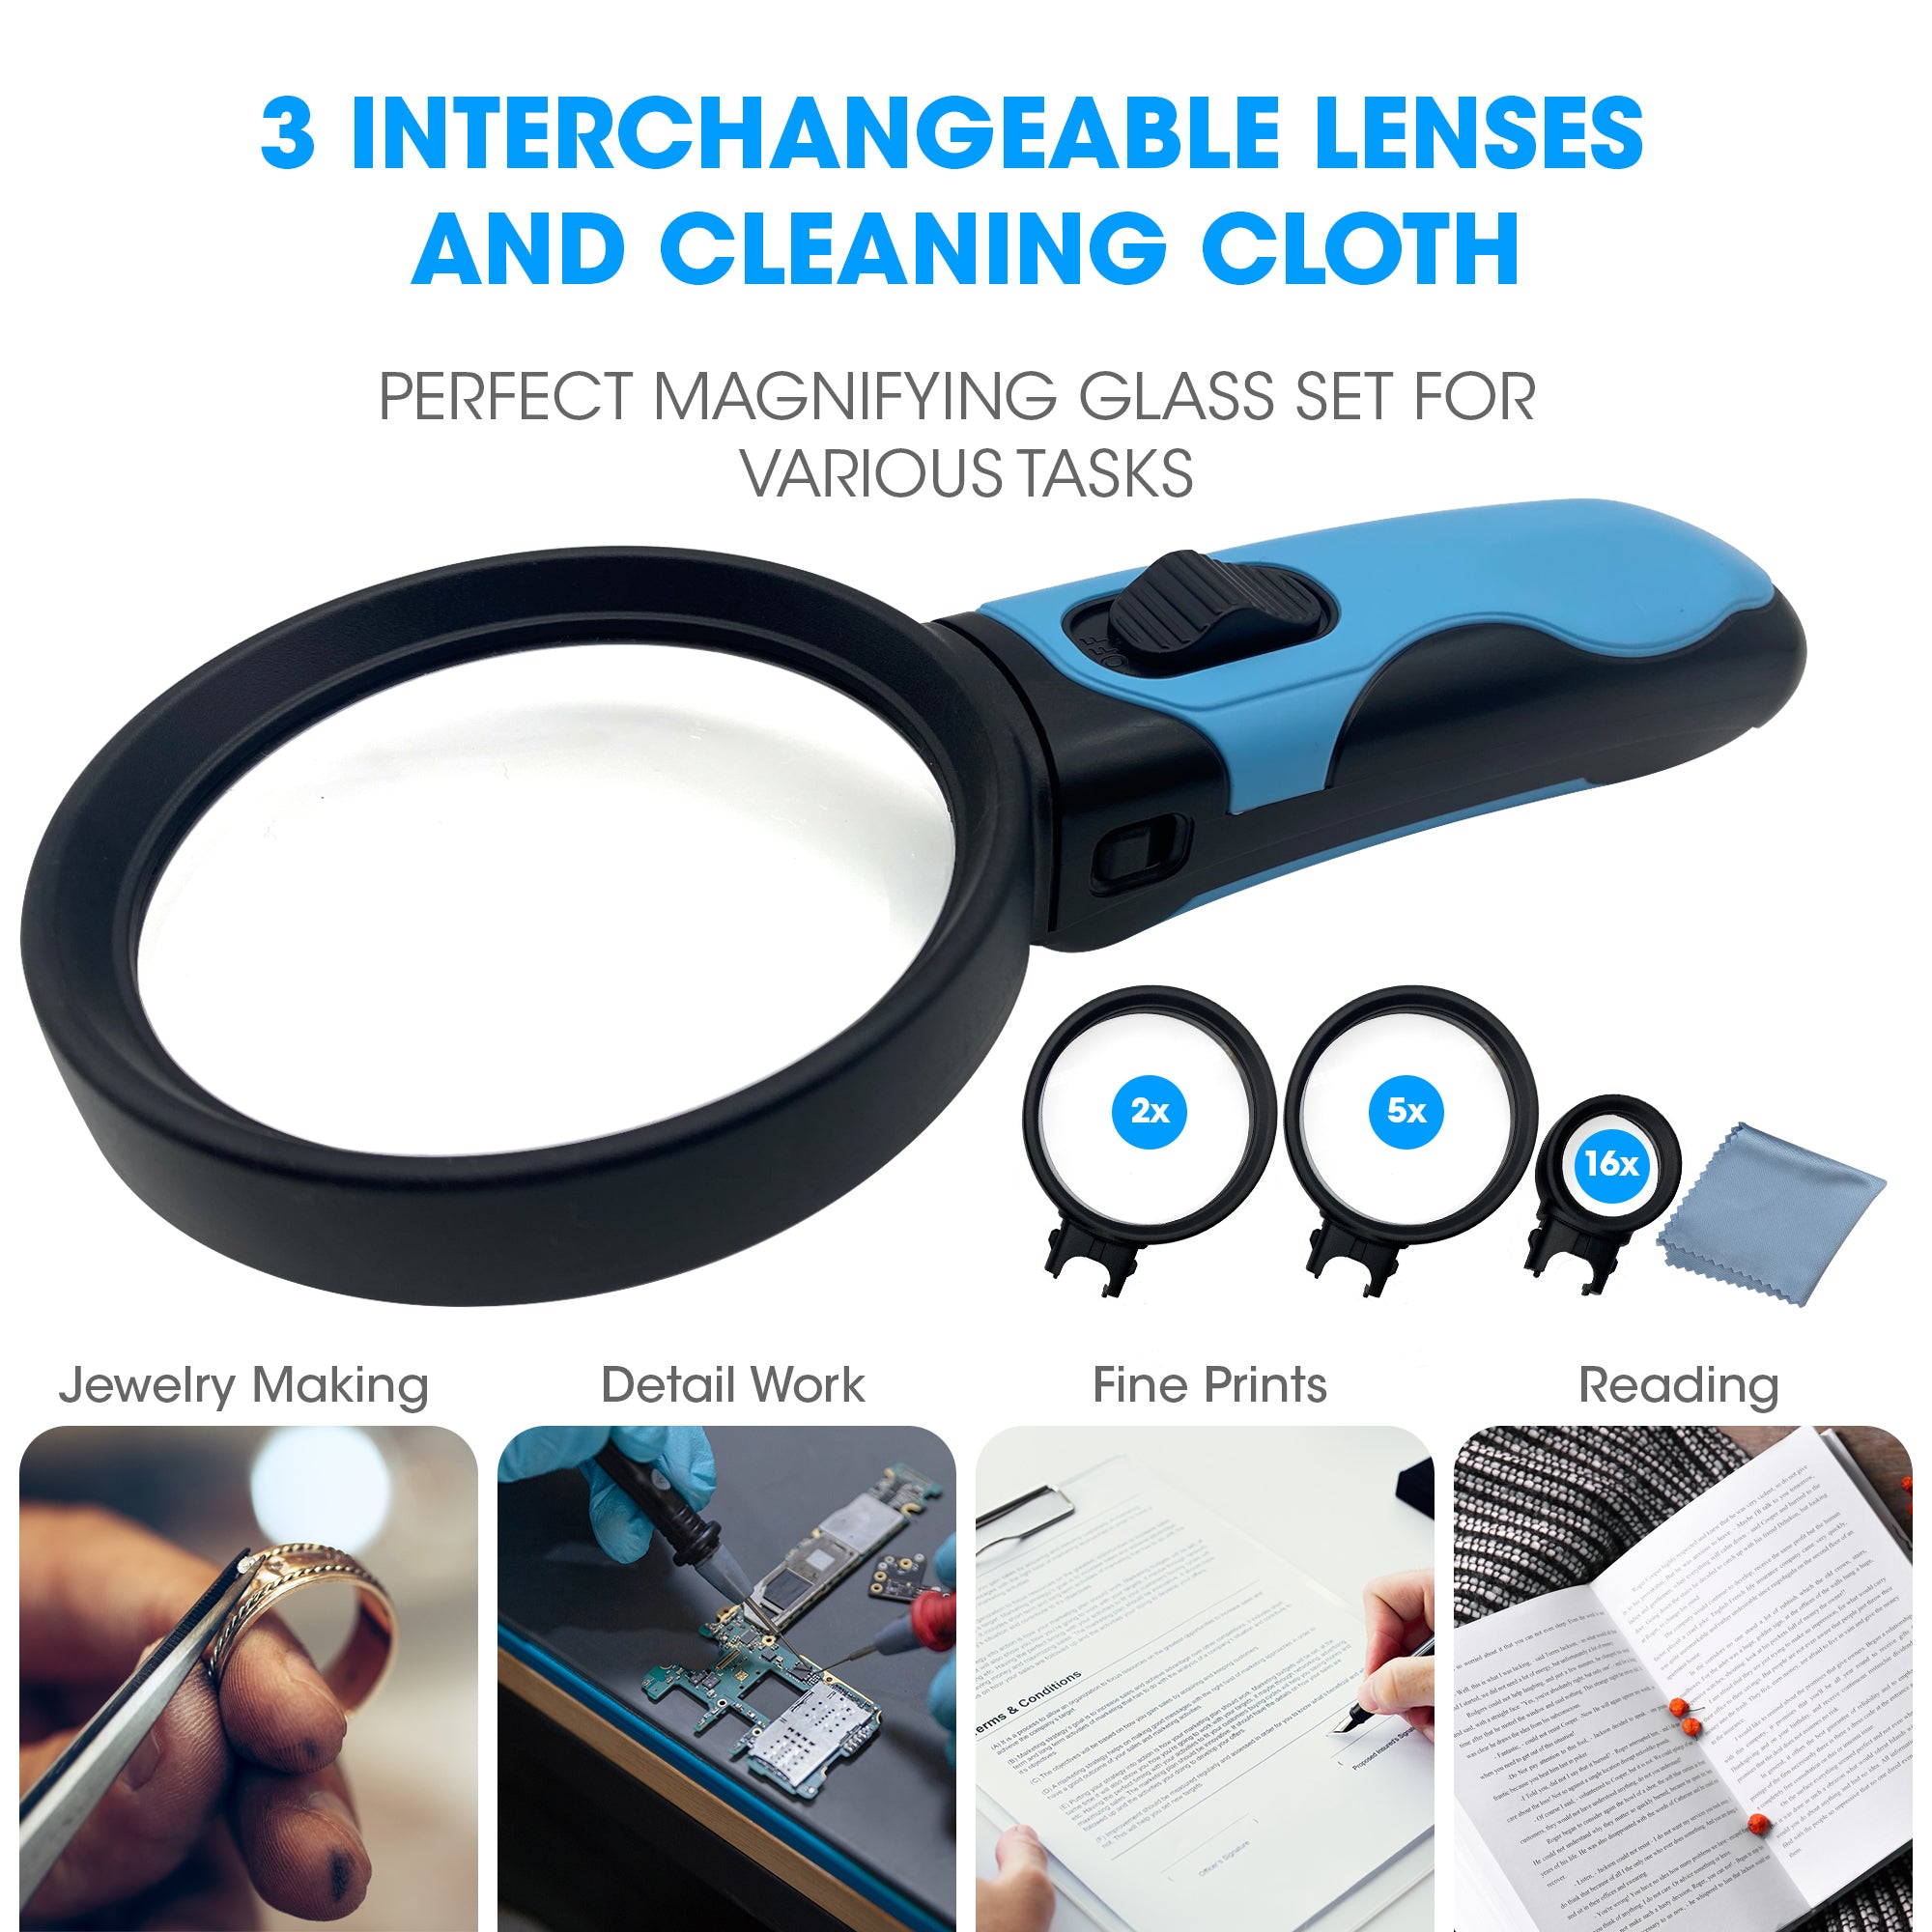 Led Light Magnifier  Magnifying Glass - Magnifying Glass Light